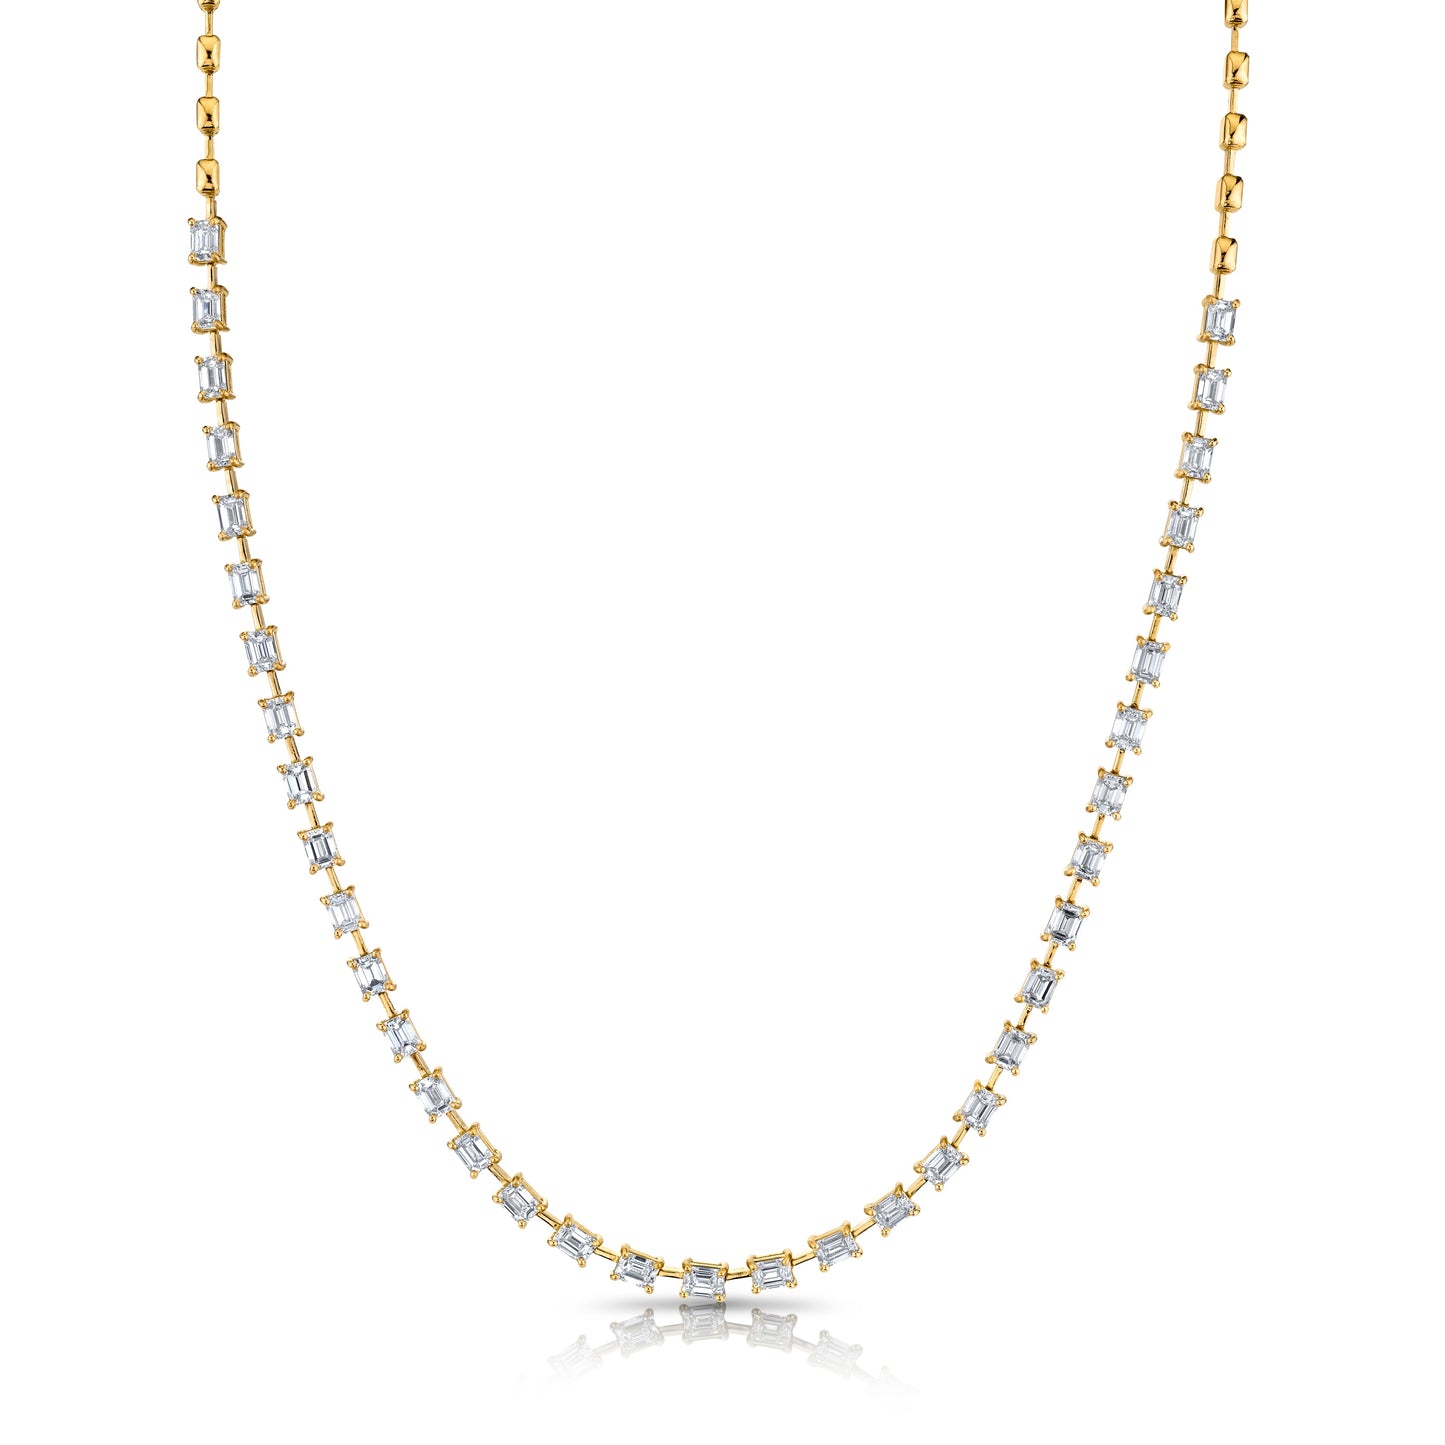 18k Yellow Gold Bar Necklace with Emerald Cut Diamonds